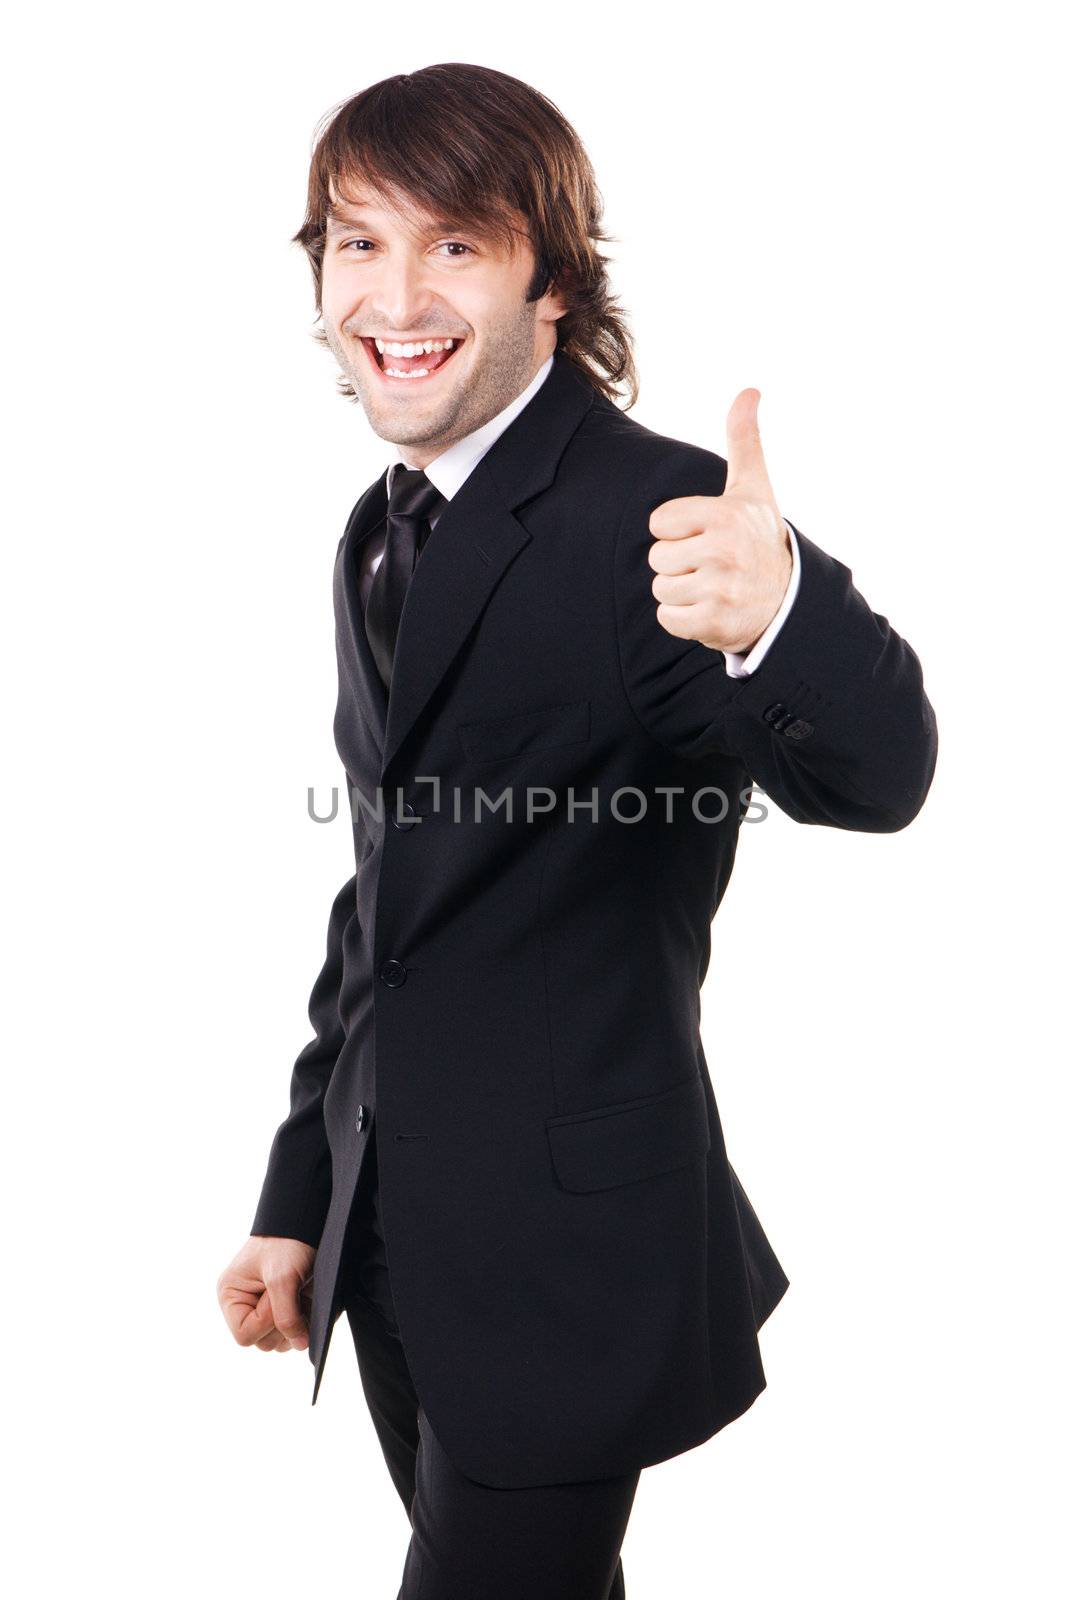 Cheerful businessman showing "Thumbs up" sign by Gdolgikh